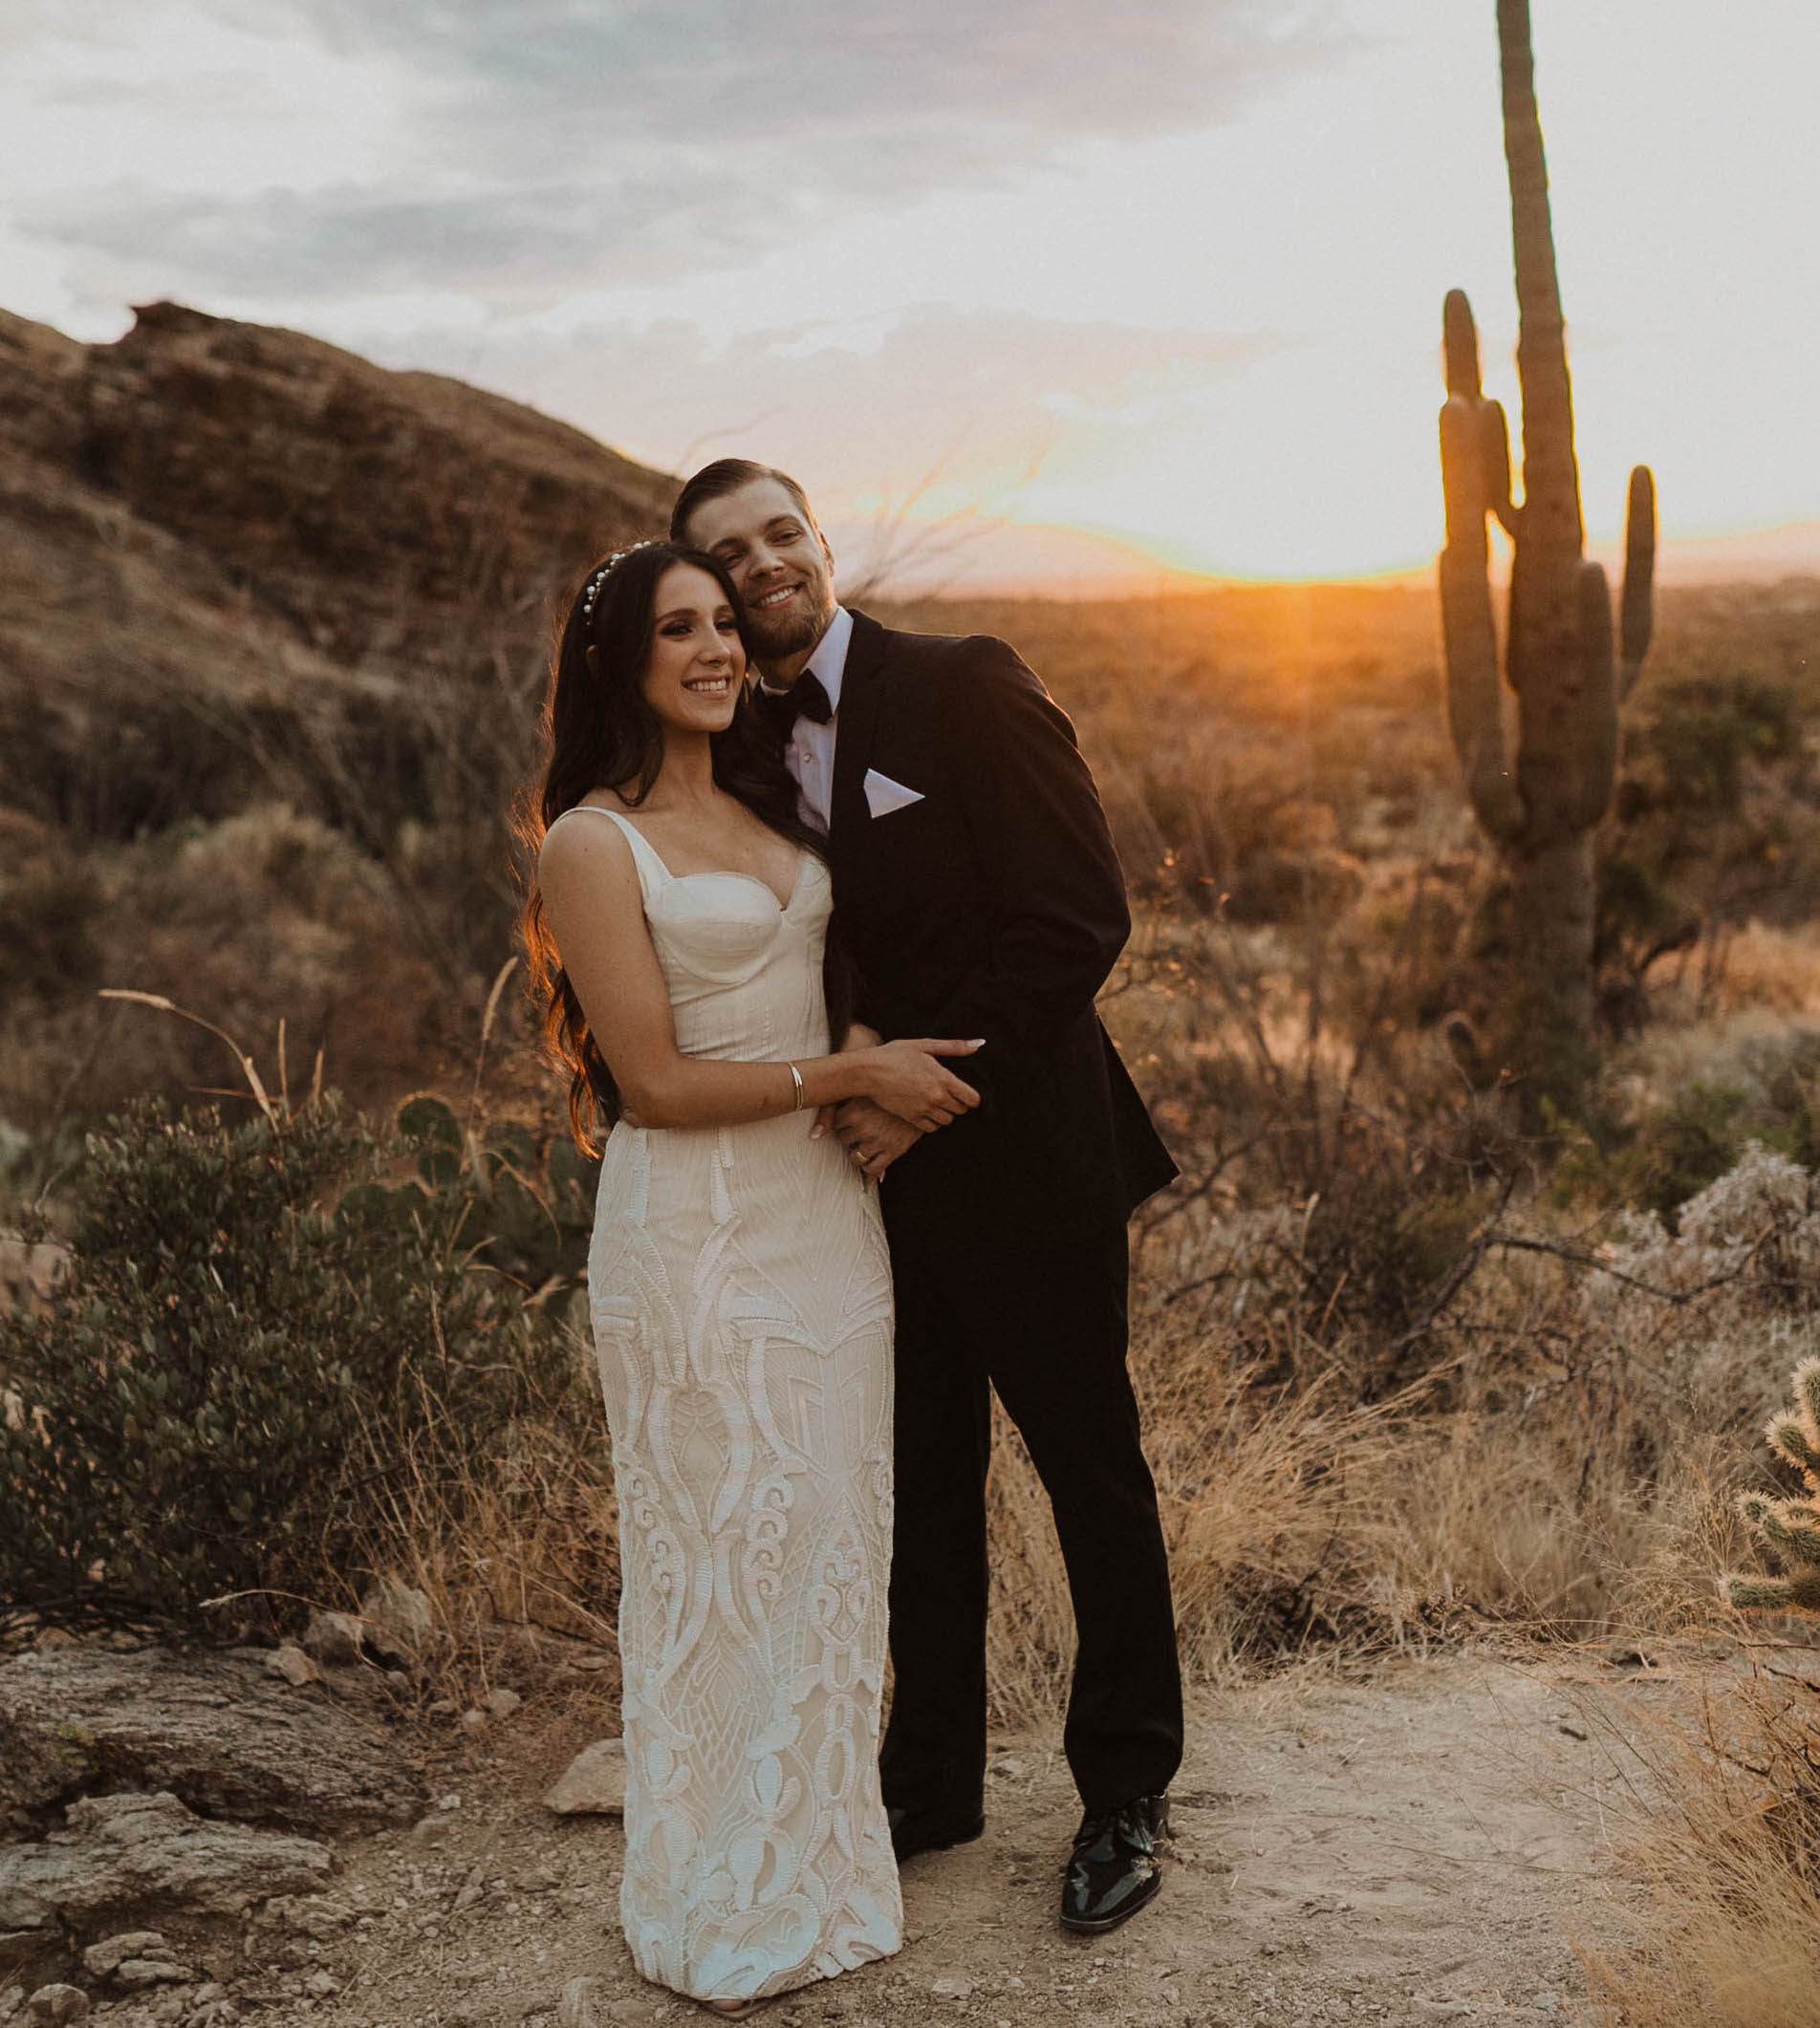 Riley from Caked Up With Riley smiles with her husband at their elopement in Arizona.